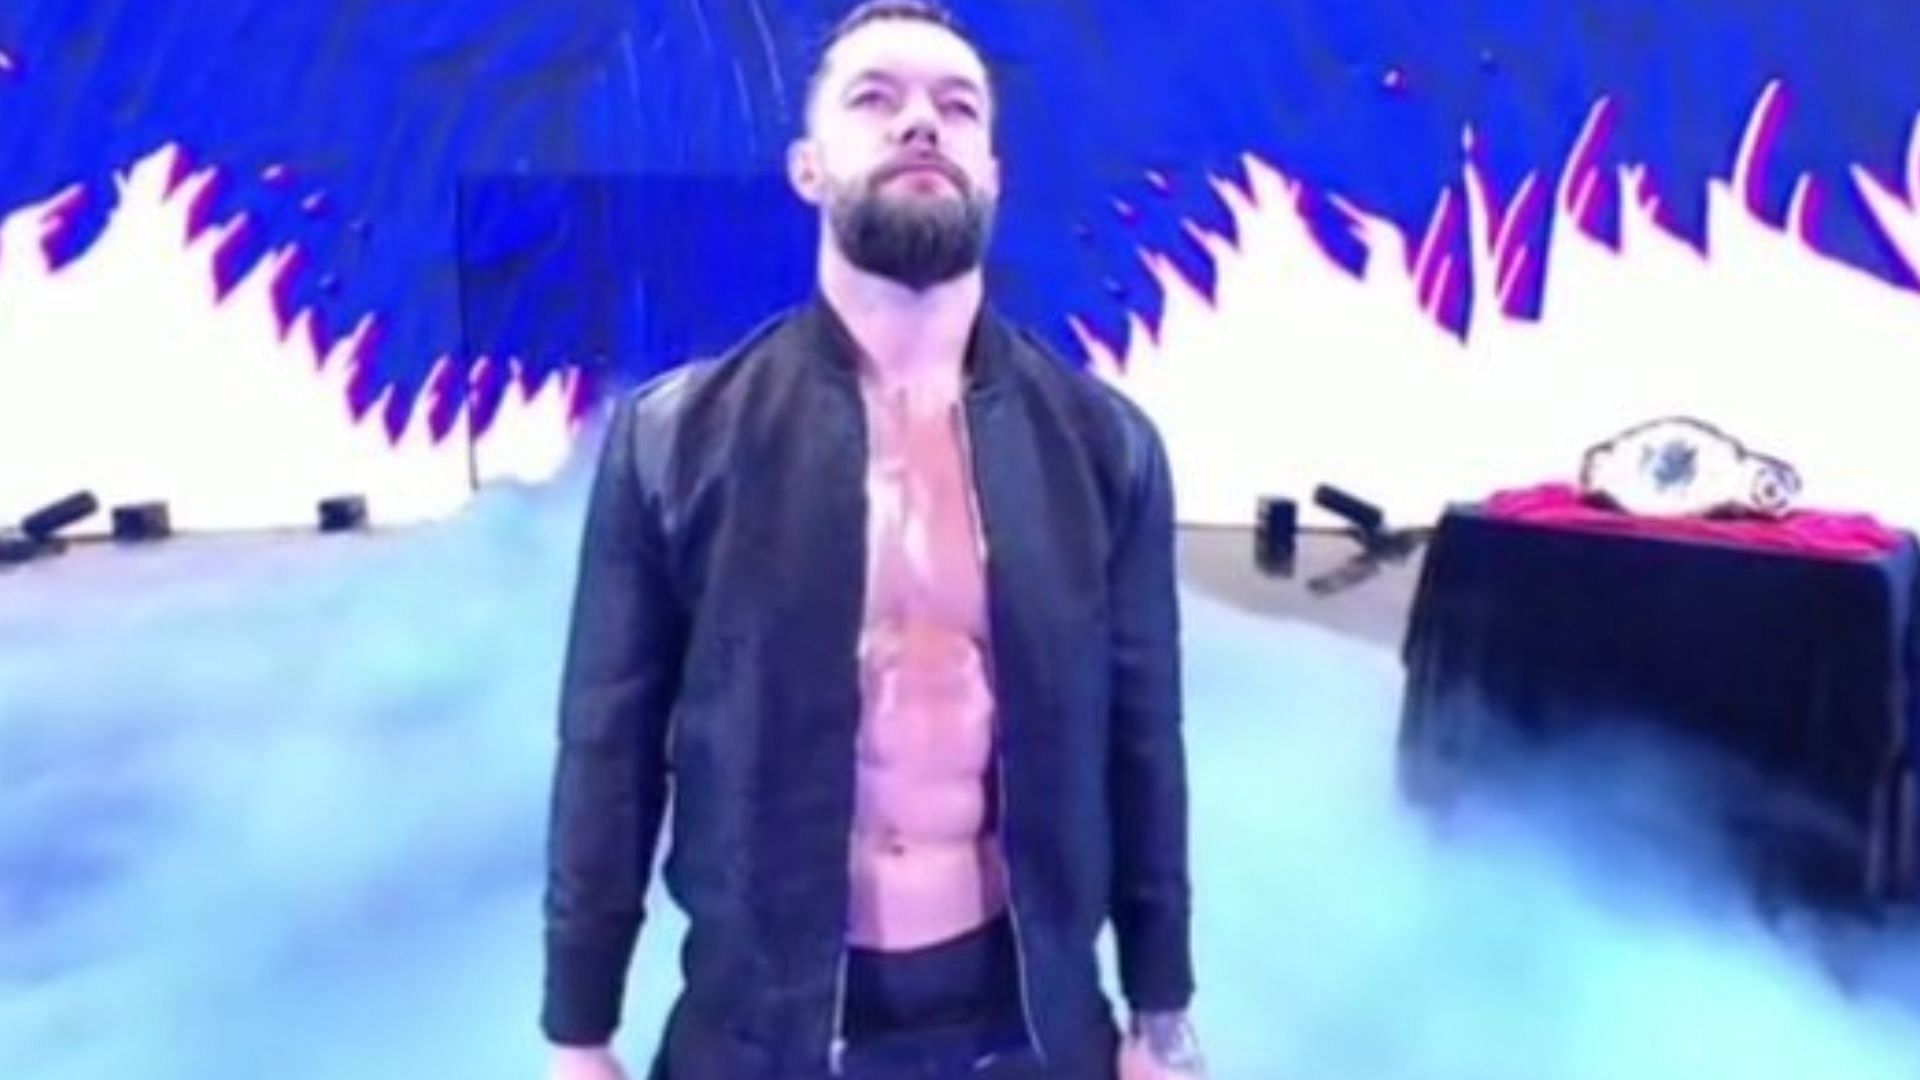 Finn Balor makes his entrance for the WWE RAW main event.